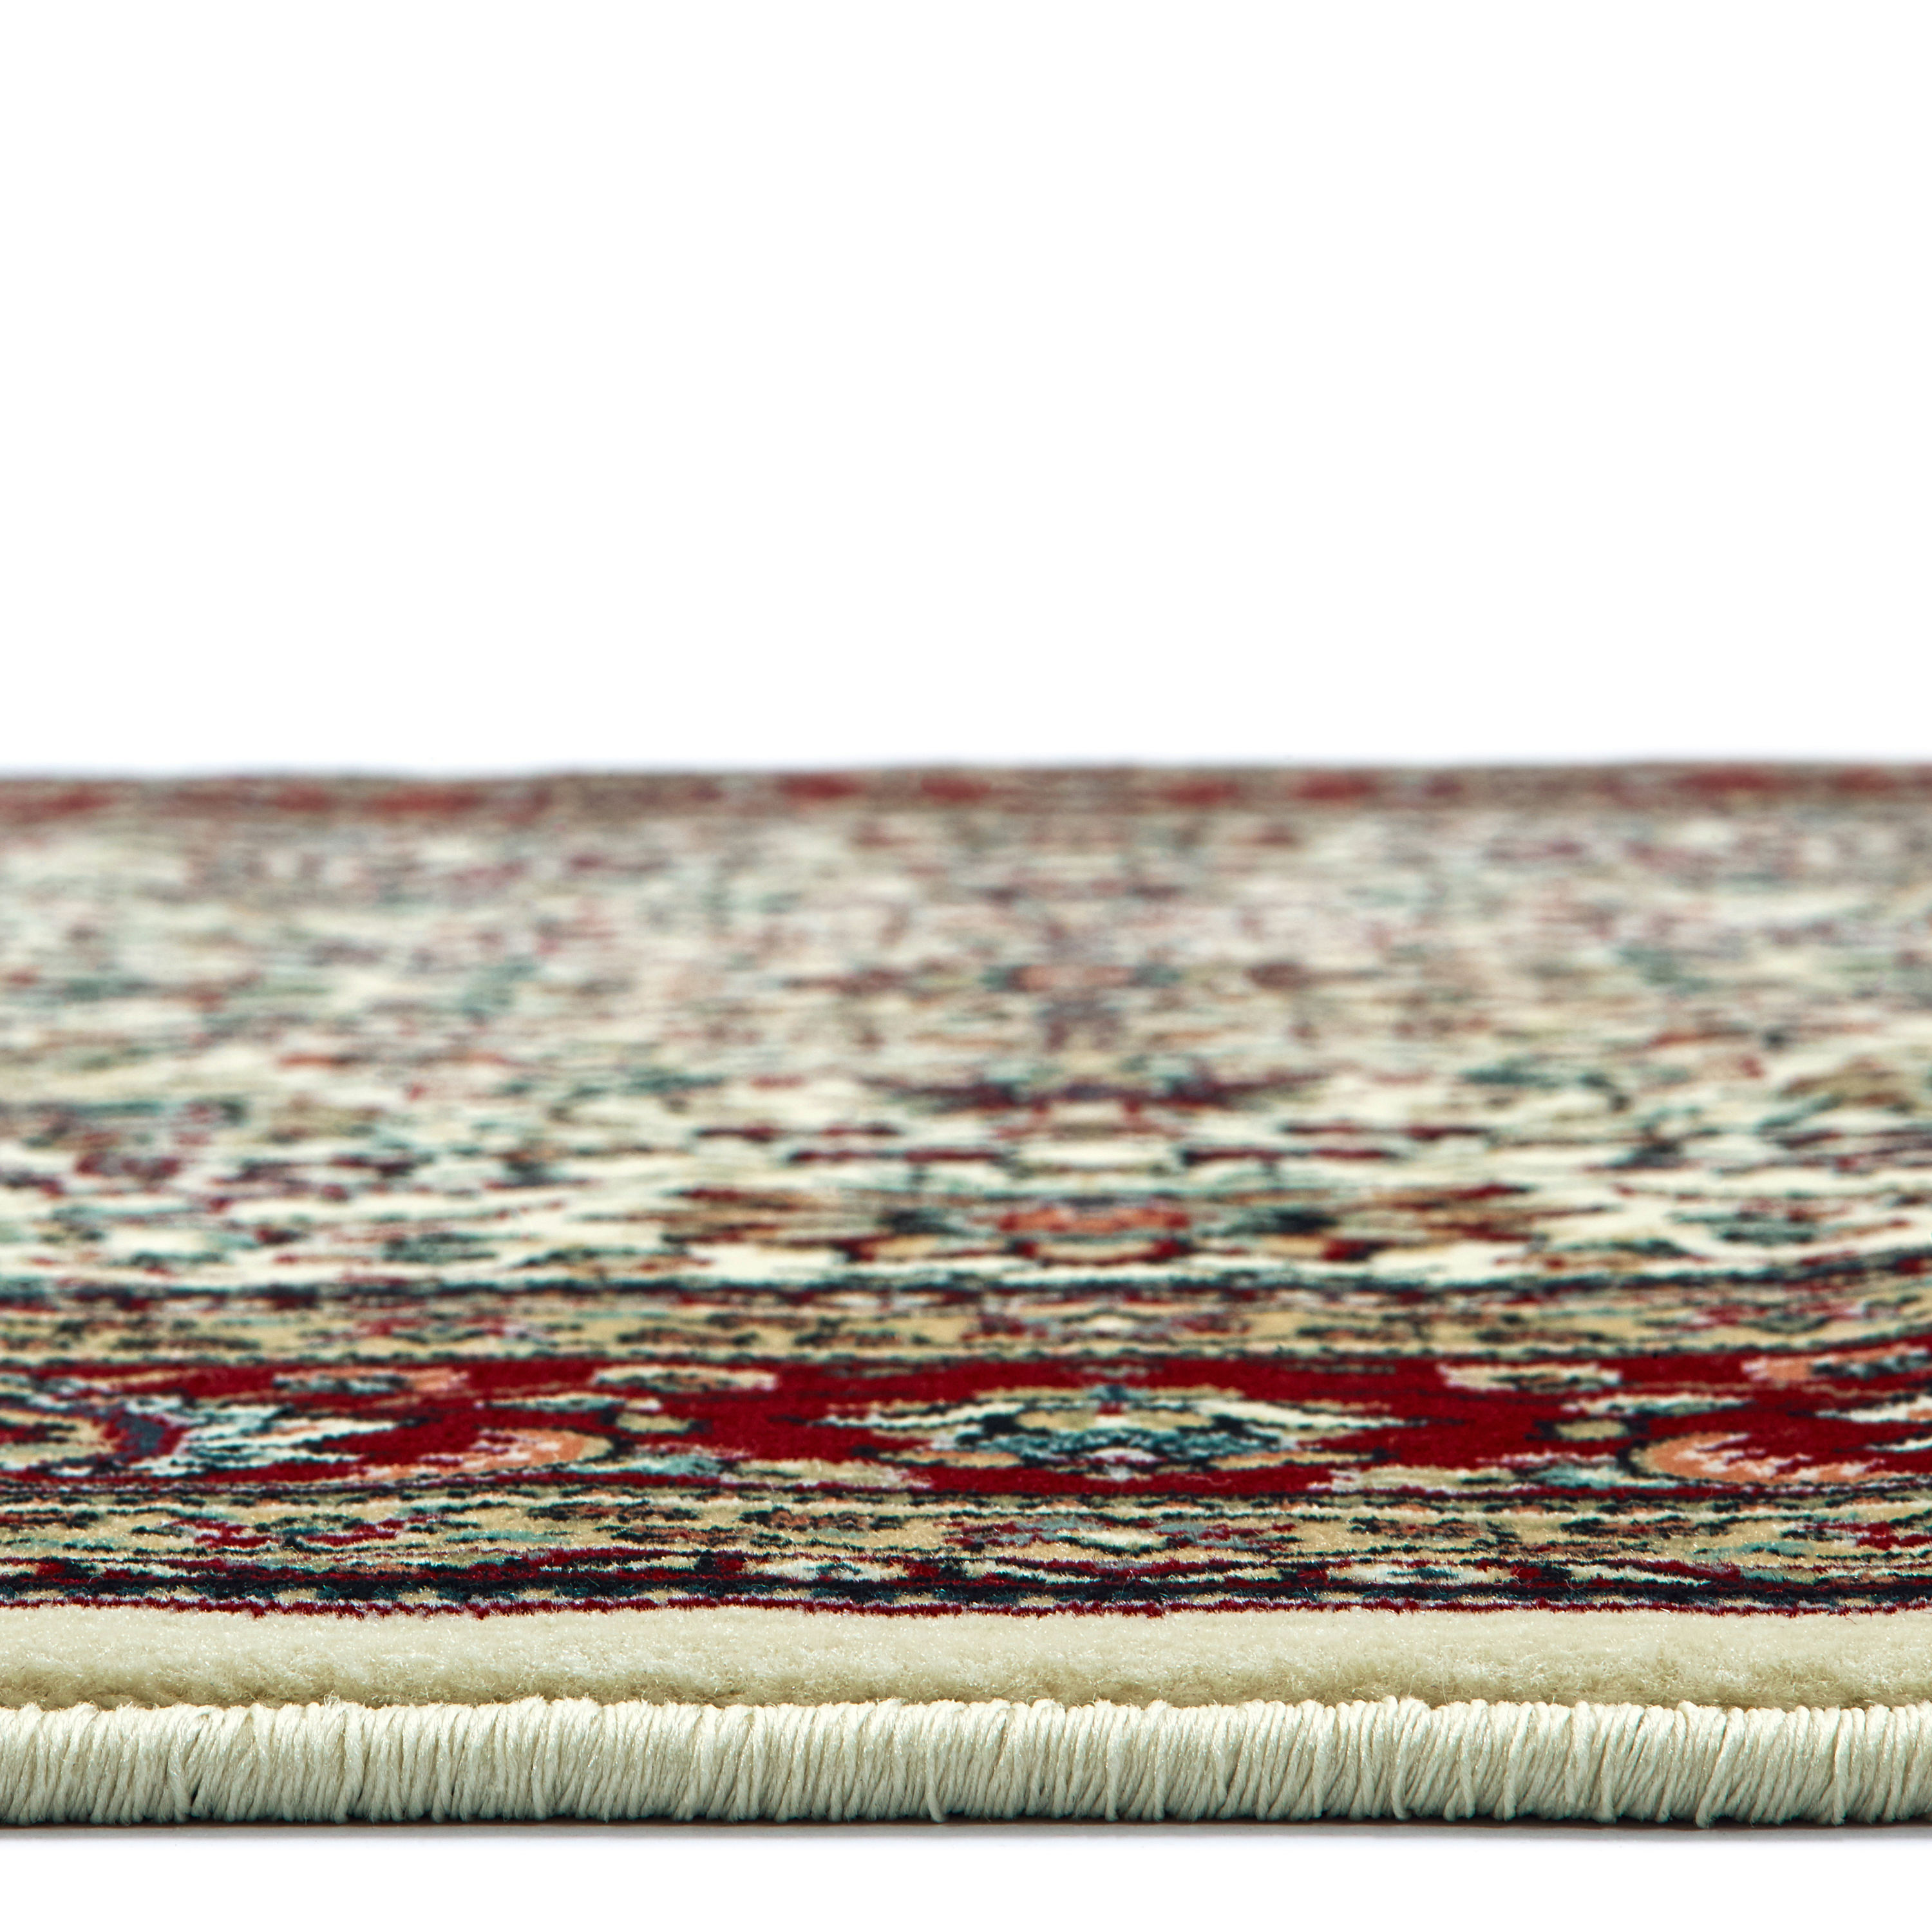 Style Selections Koralin 10 x 13 Red Indoor Floral/Botanical Oriental Area Rug | M005R10L